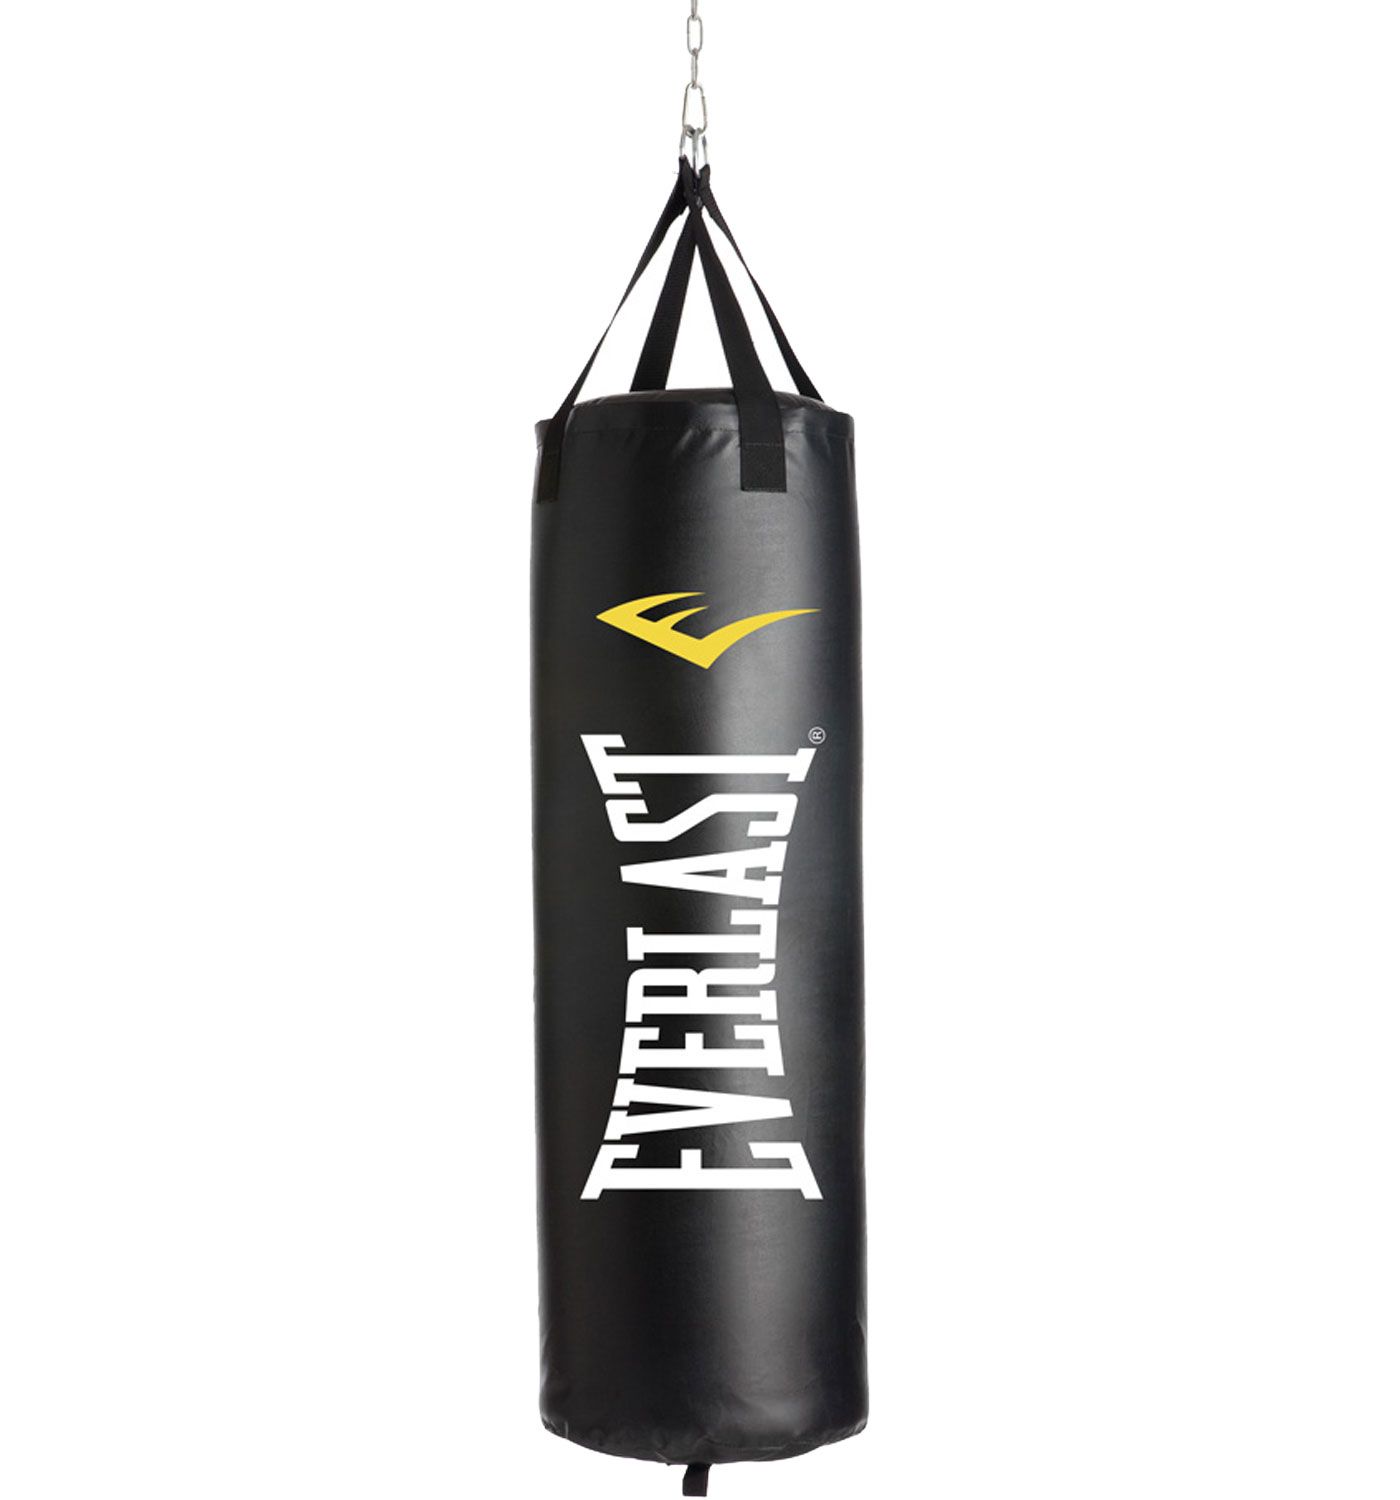 Everlast Mma Punching Bag With Stand | IQS Executive